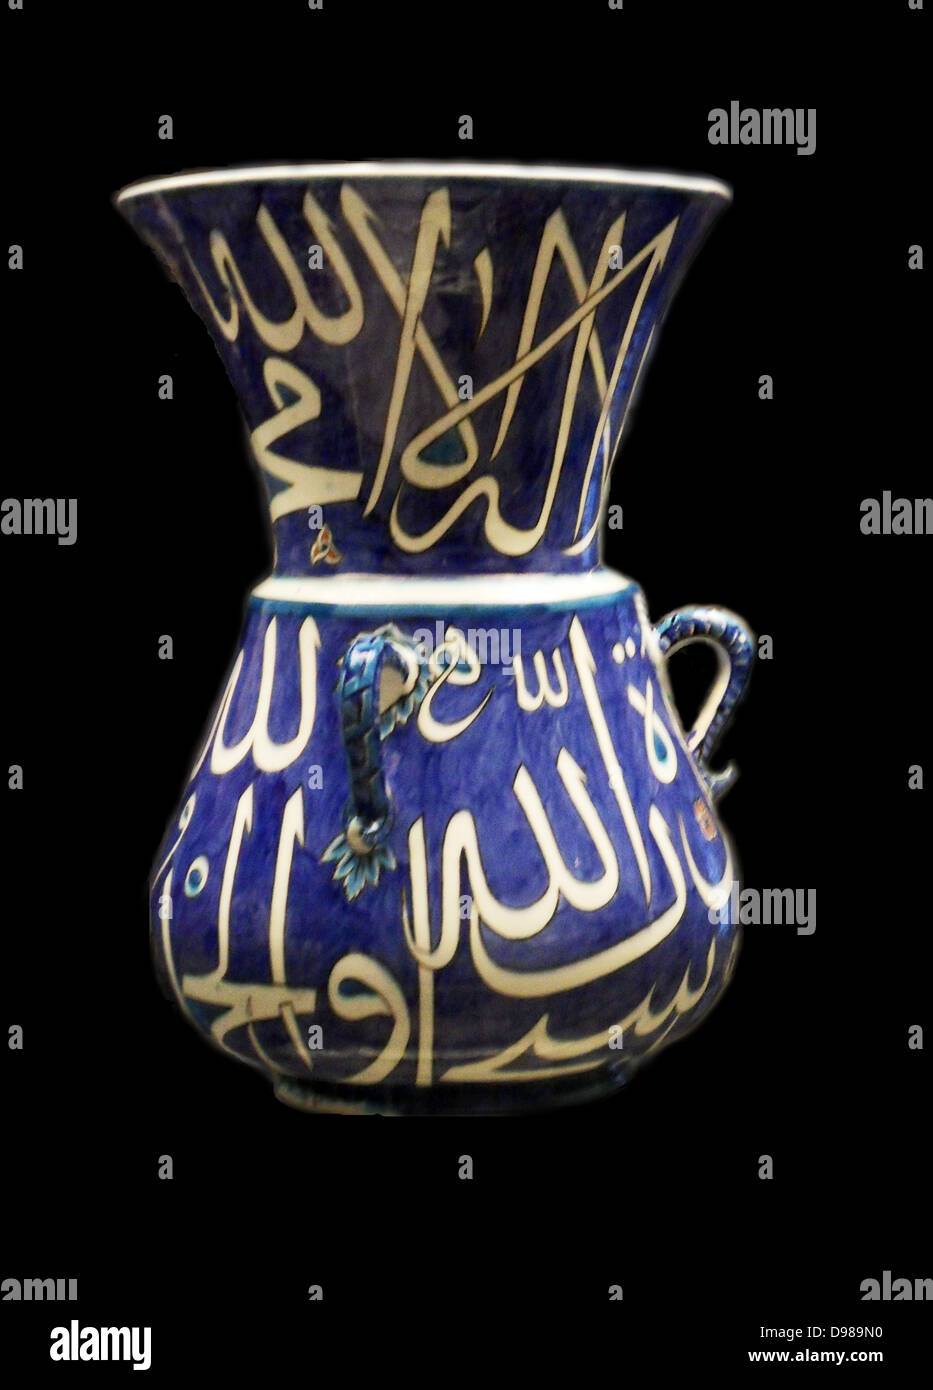 Mosque lamps.  Ceramic mosque lamps hung from the ceiling by chains.  Their shape is based on earlier glass examples fom Mamluk Egypt (AD 1250-1517).  It is likely that a glass oil lamp would have been fitted to provide light.  There is also a symbolic association of light with God. Stock Photo